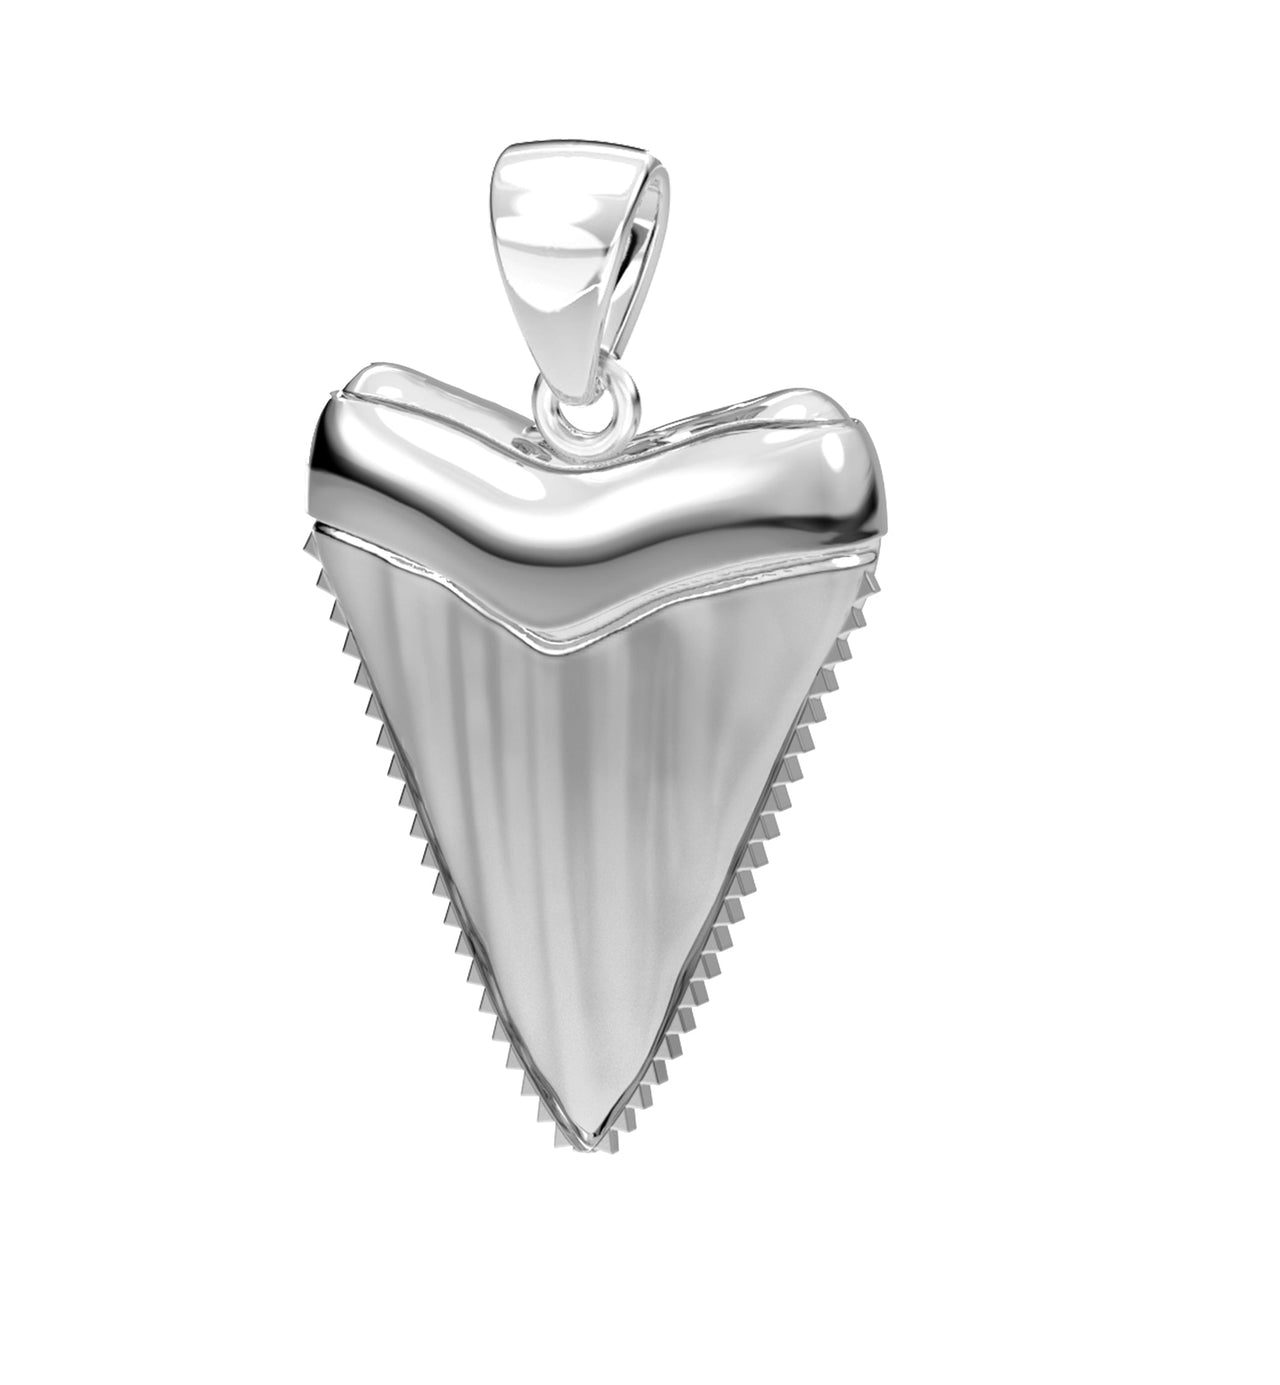 Men's Solid 925 Sterling Silver Great White Shark Tooth Pendant Necklace, 27mm